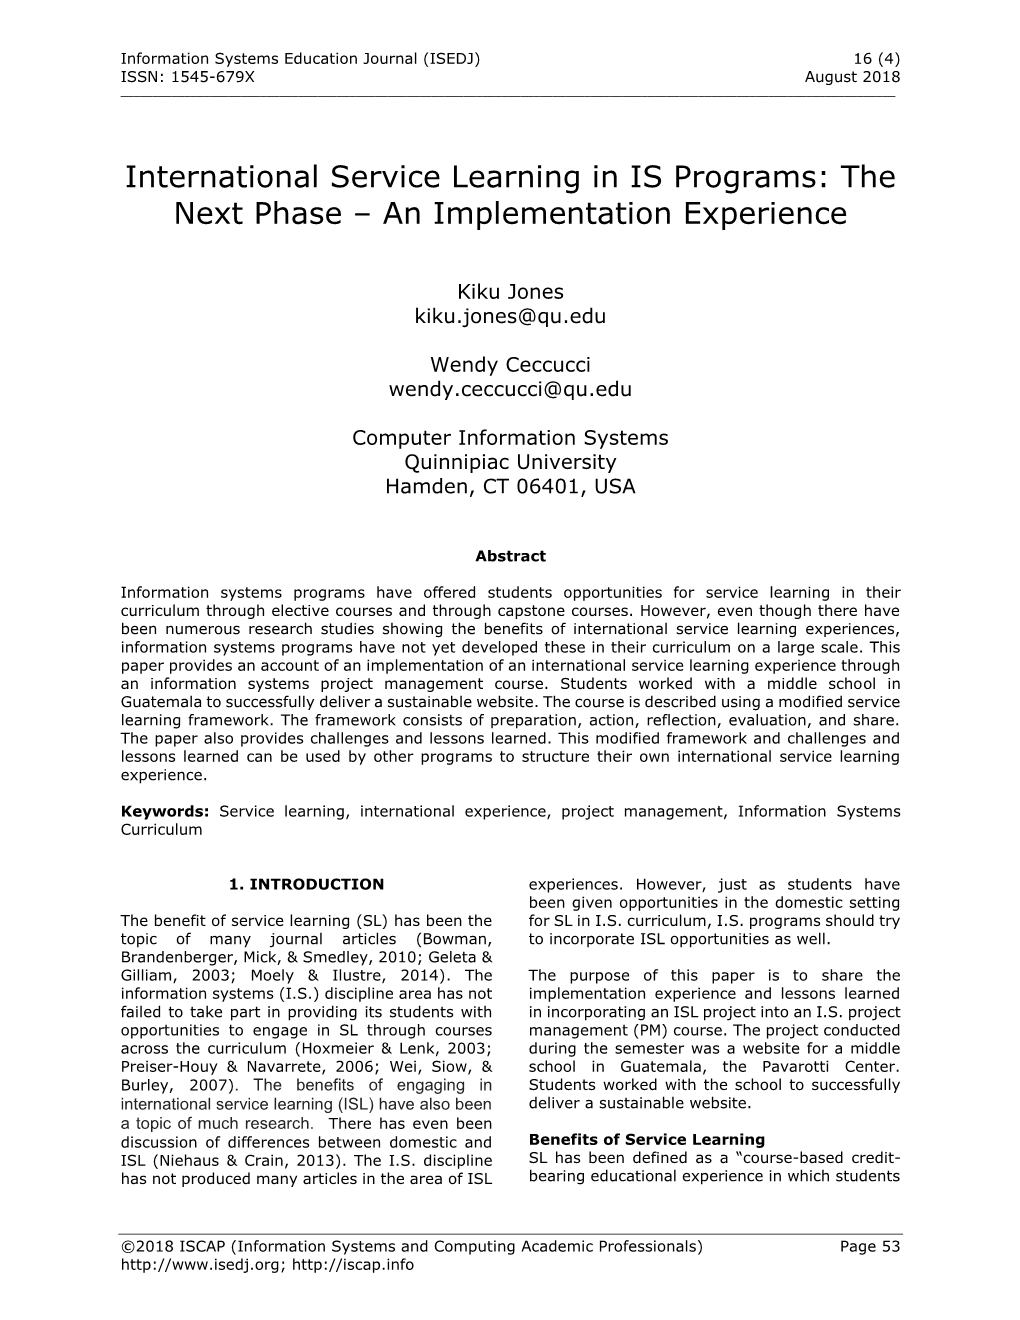 International Service Learning in IS Programs: the Next Phase